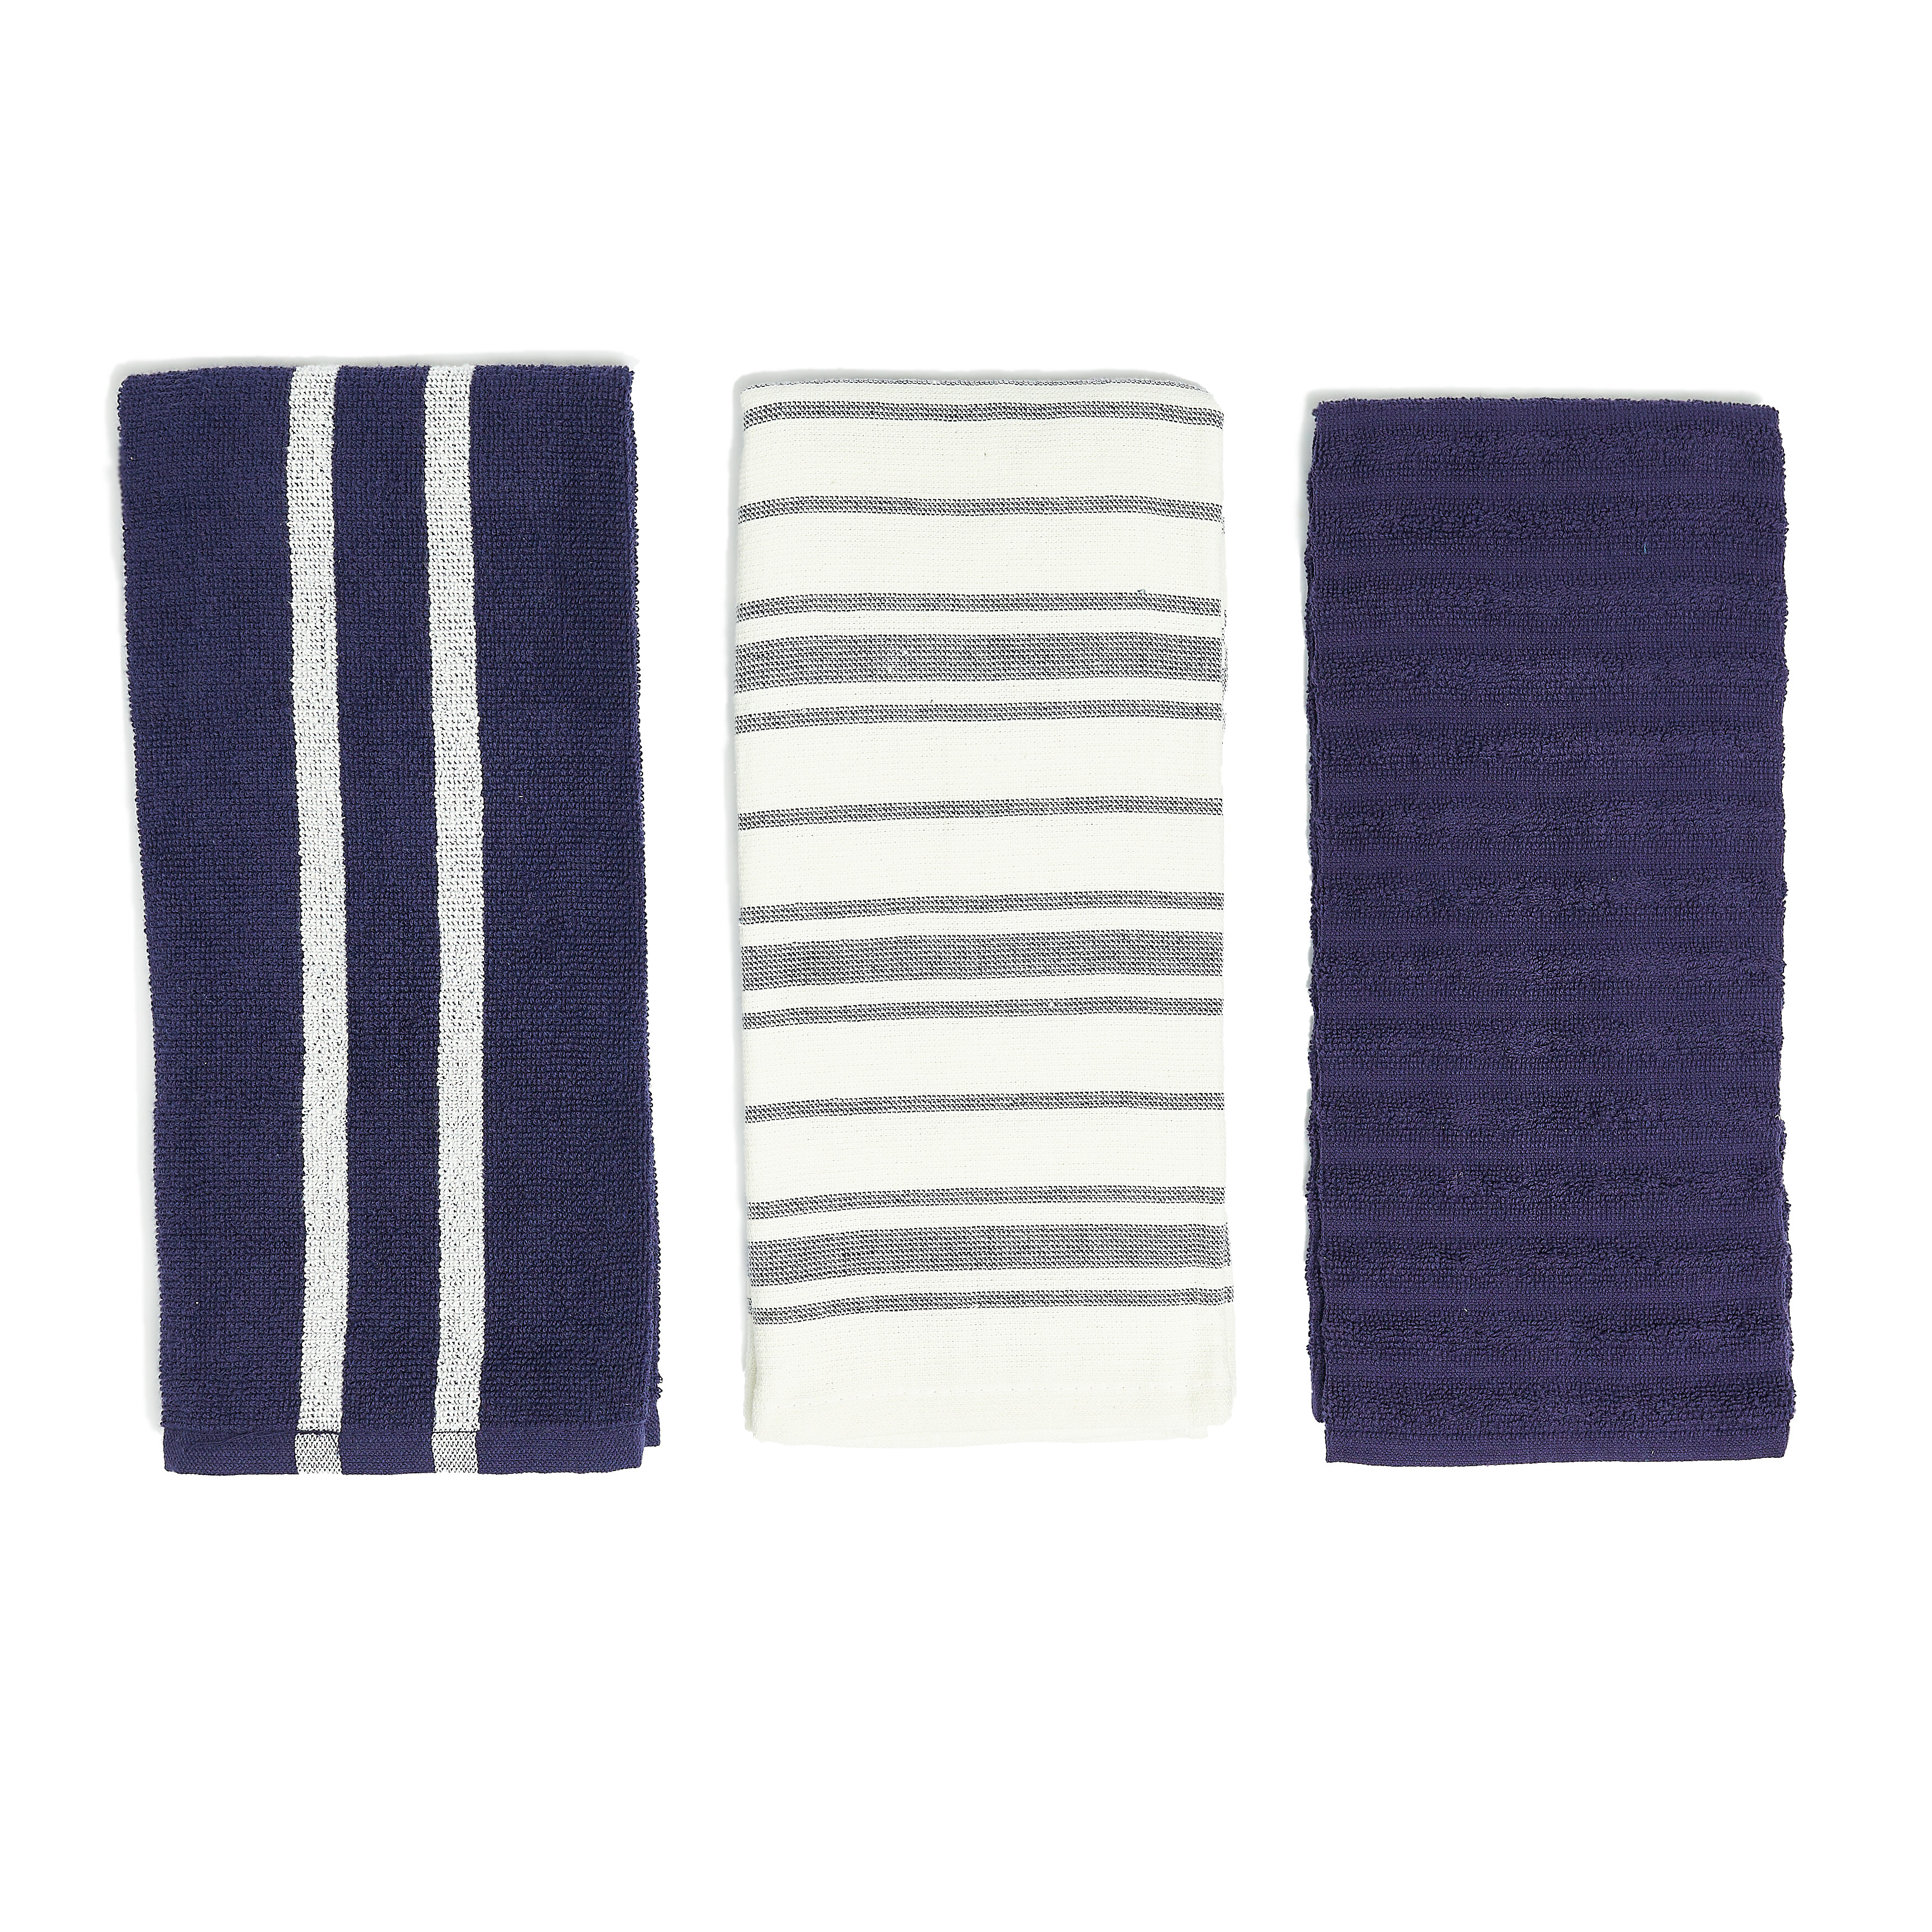 Microfiber Kitchen Towels - Super Absorbent, Soft and Solid Color Dish  Towels, 8 Pack (Stripe Designed Purple and White Colors), 26 x 18 Inch  (Purple) 